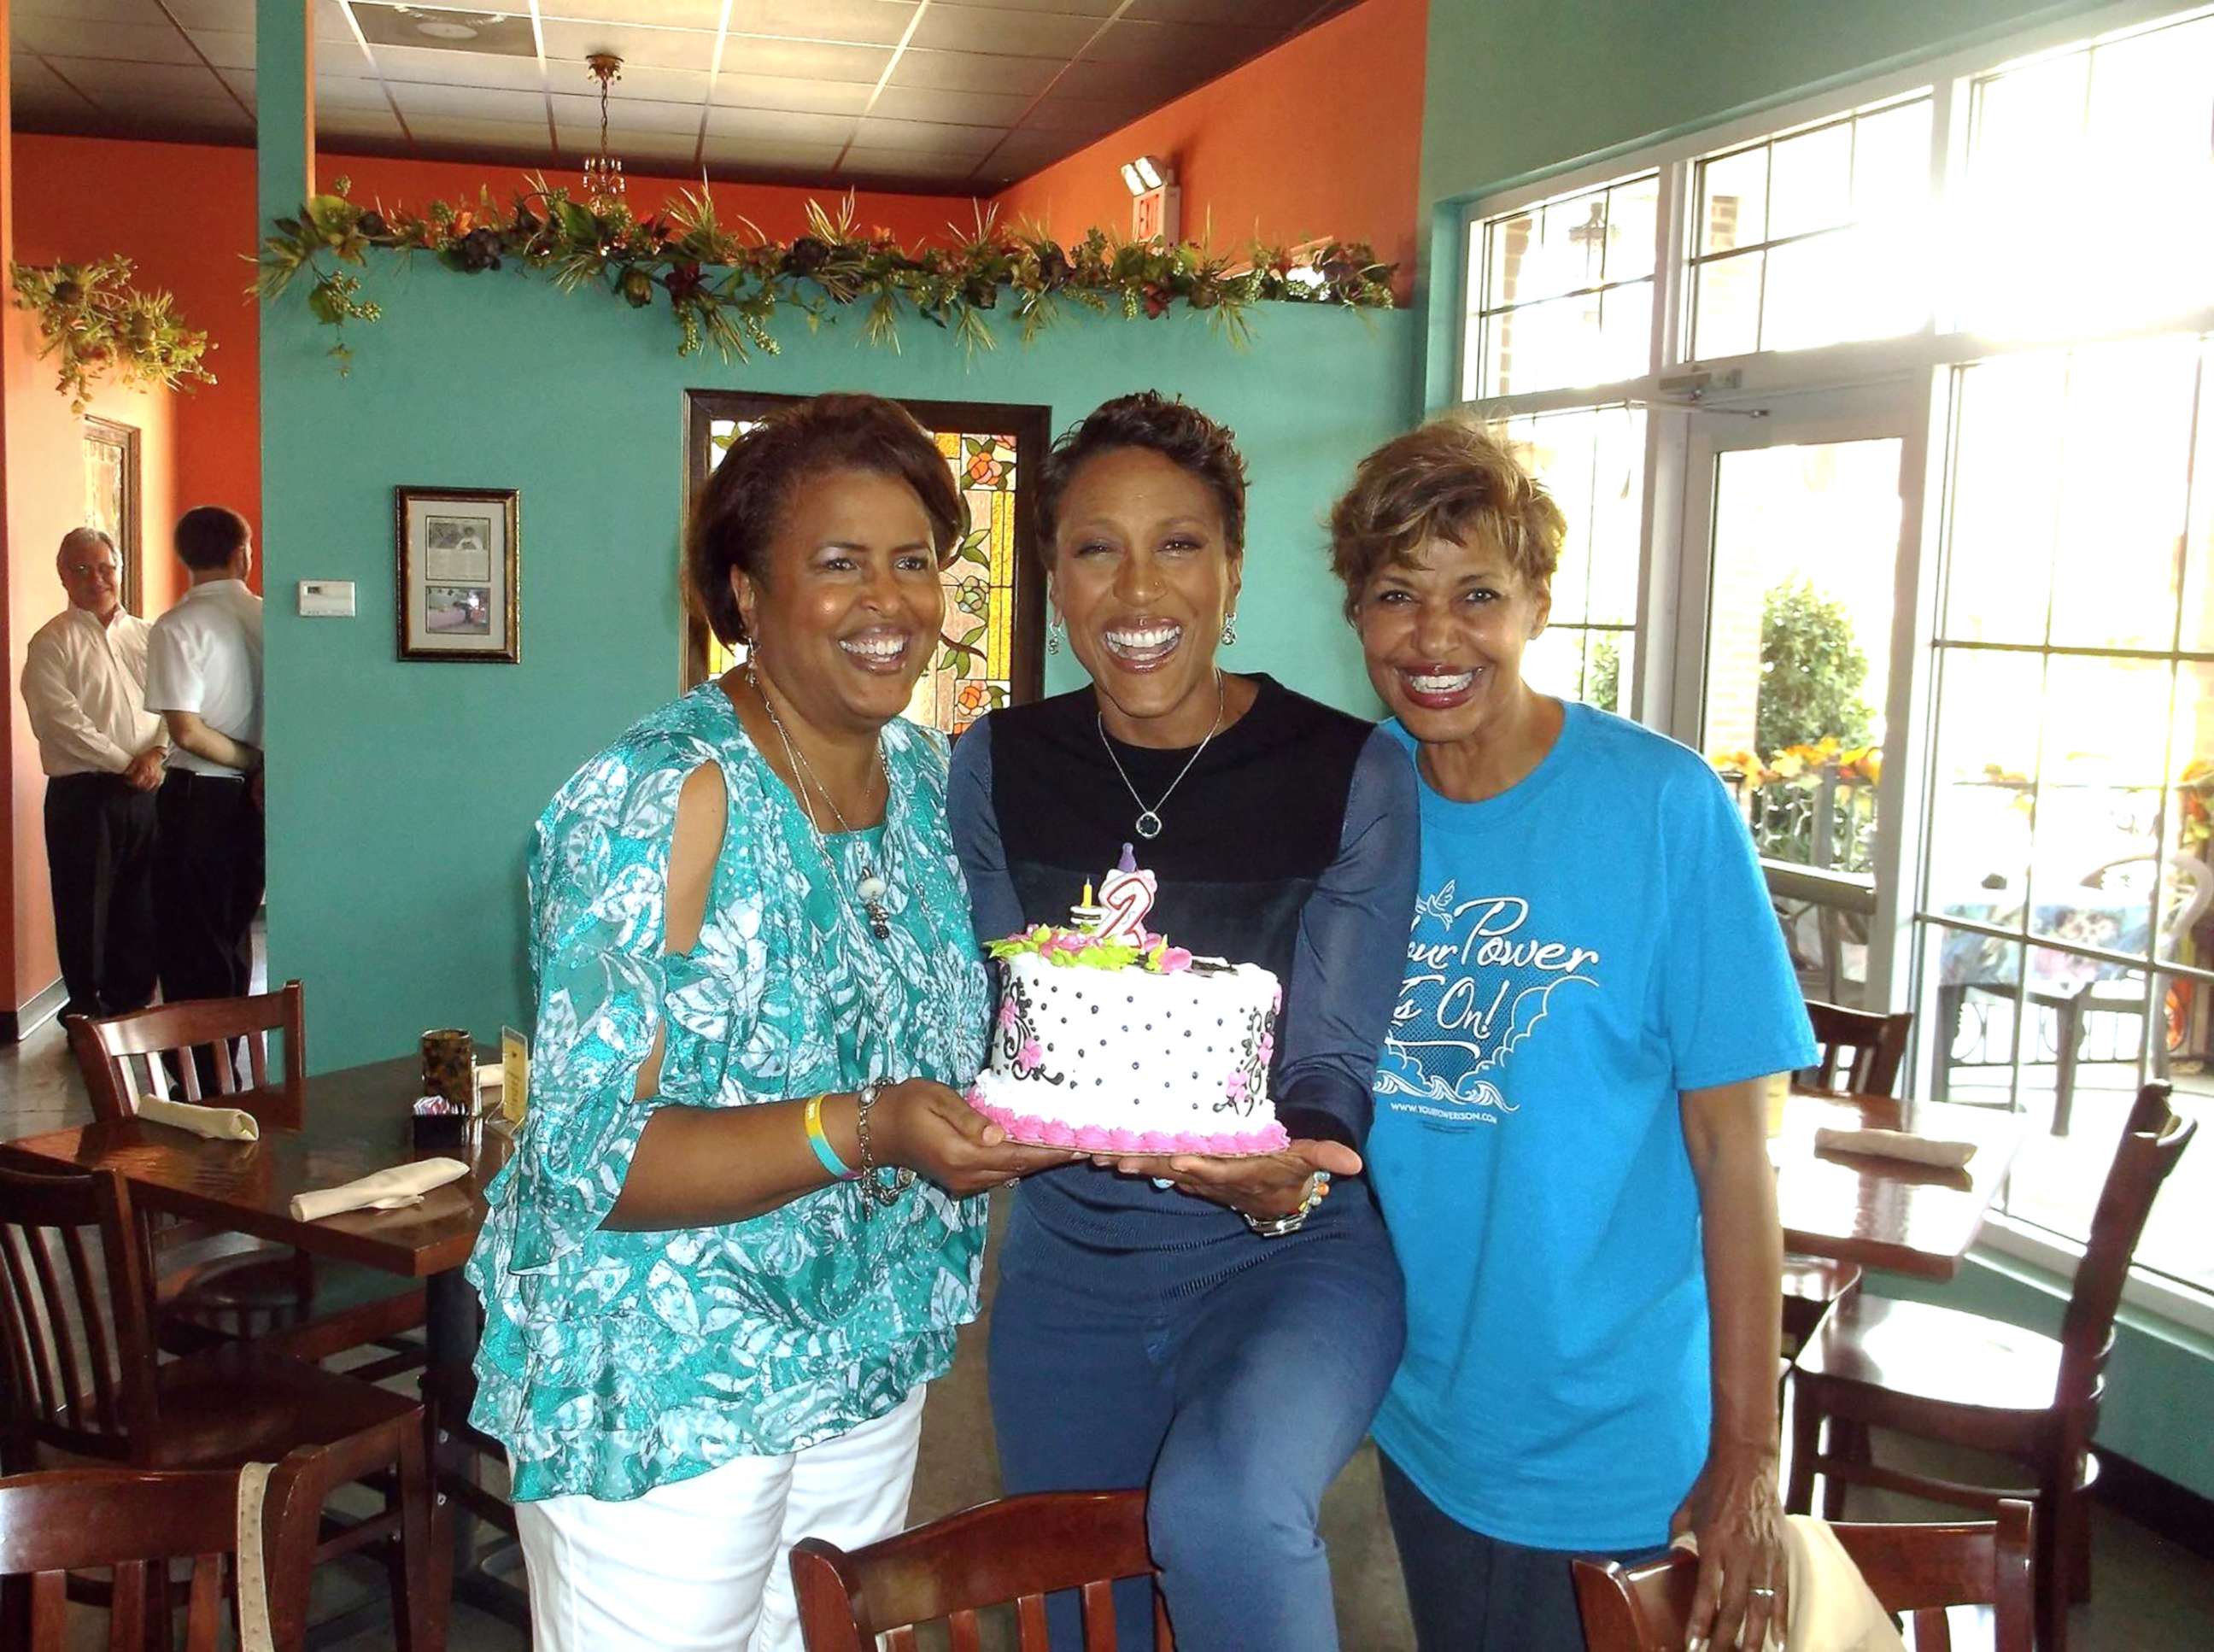 PHOTO: ABC News' Robin Roberts and her sisters are photographed celebrating her second "birthday."